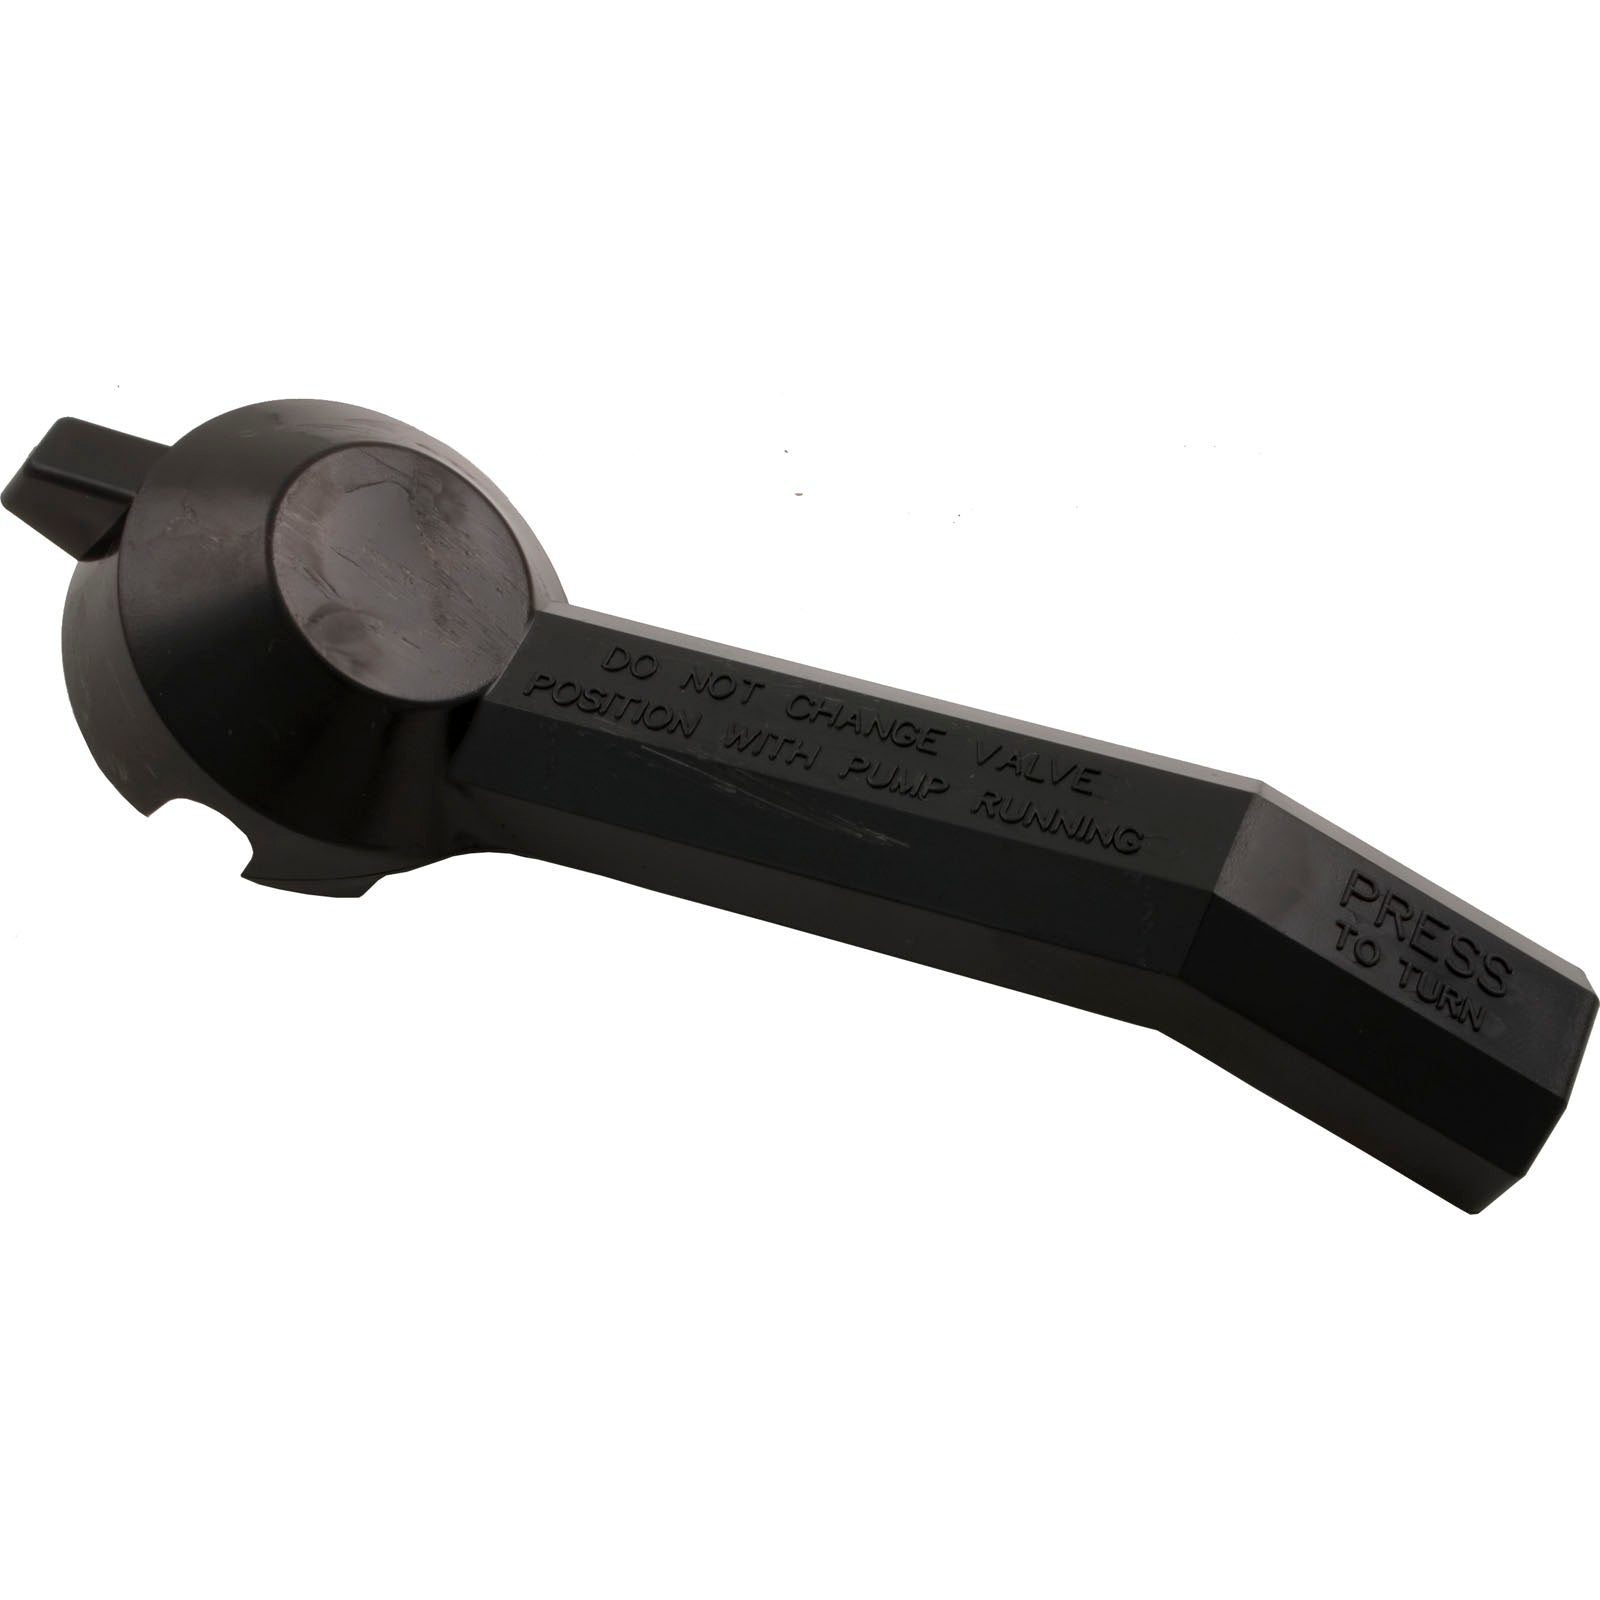 Handle, Pentair PacFab 1-1/2" and 2" High Flow Valves- 272520